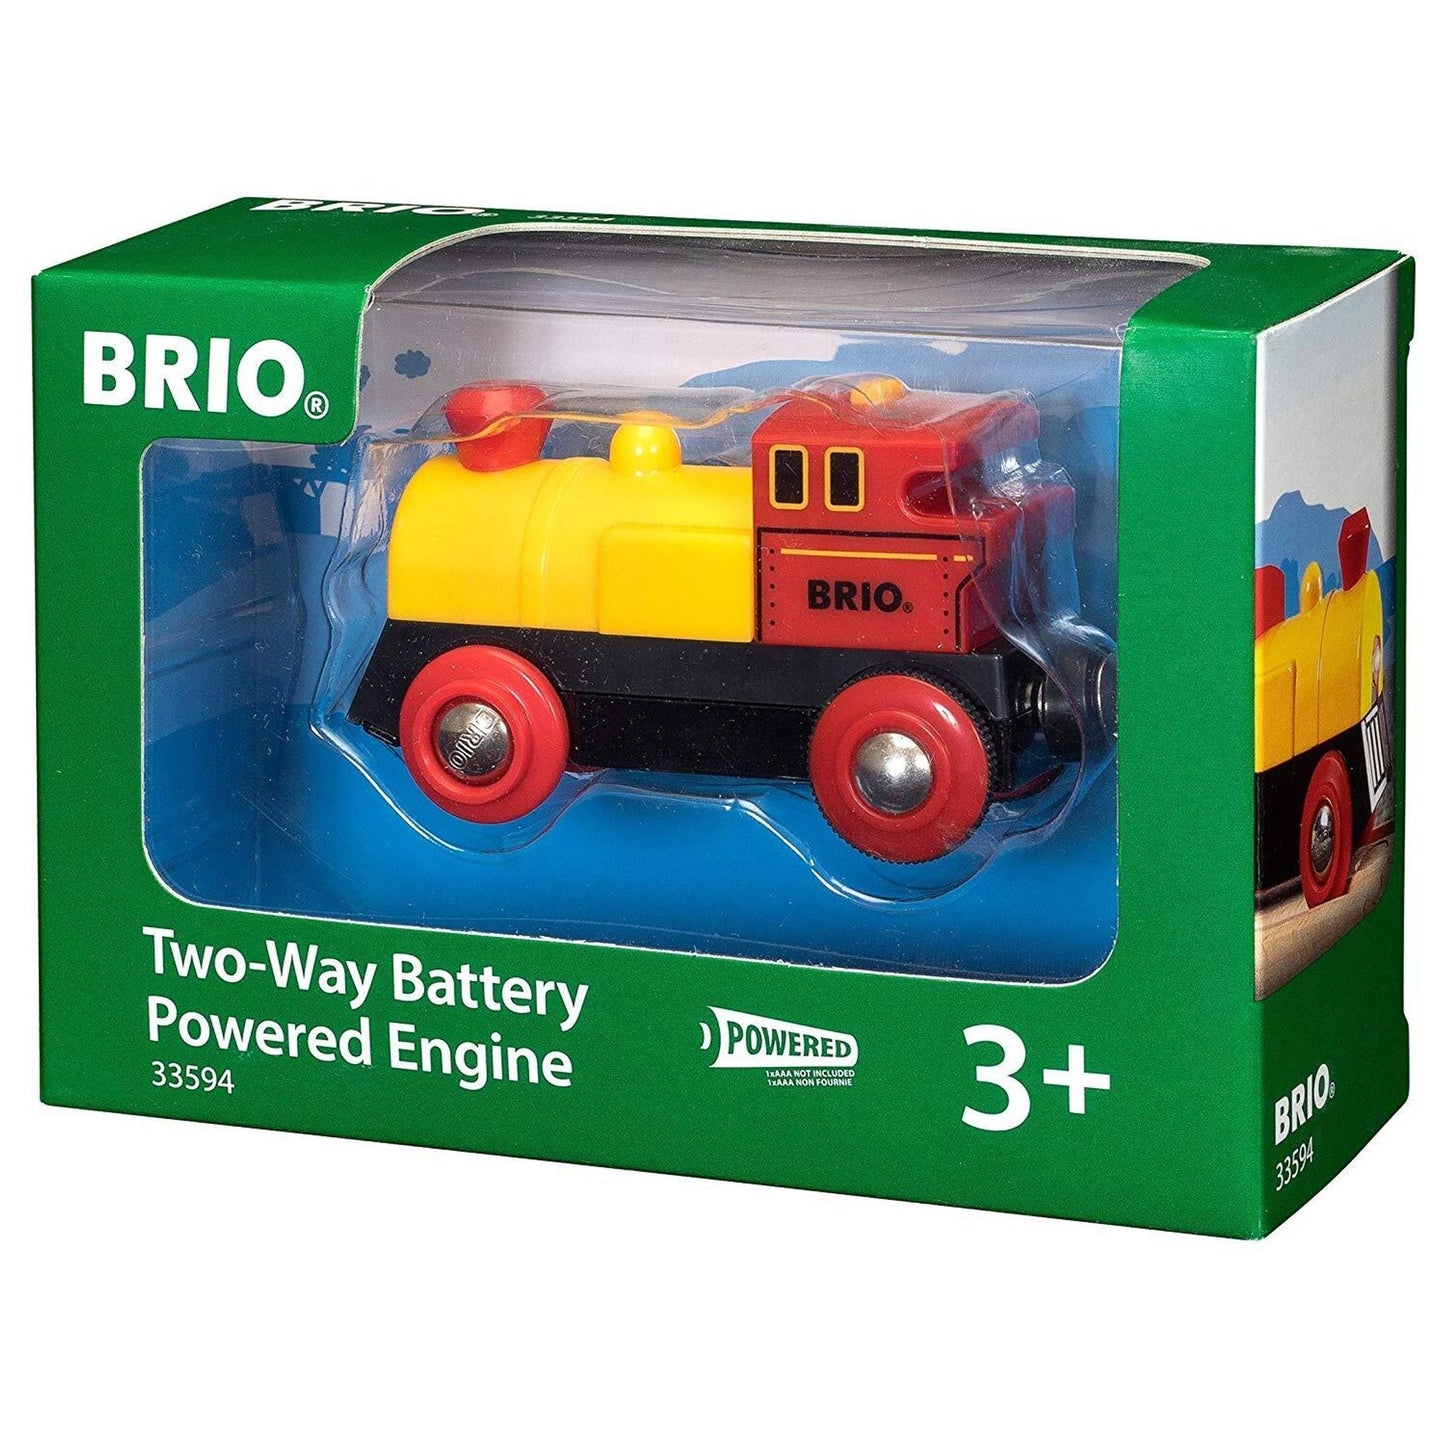 BRIO BO - Two-Way Battery Powered Engine - Toybox Tales